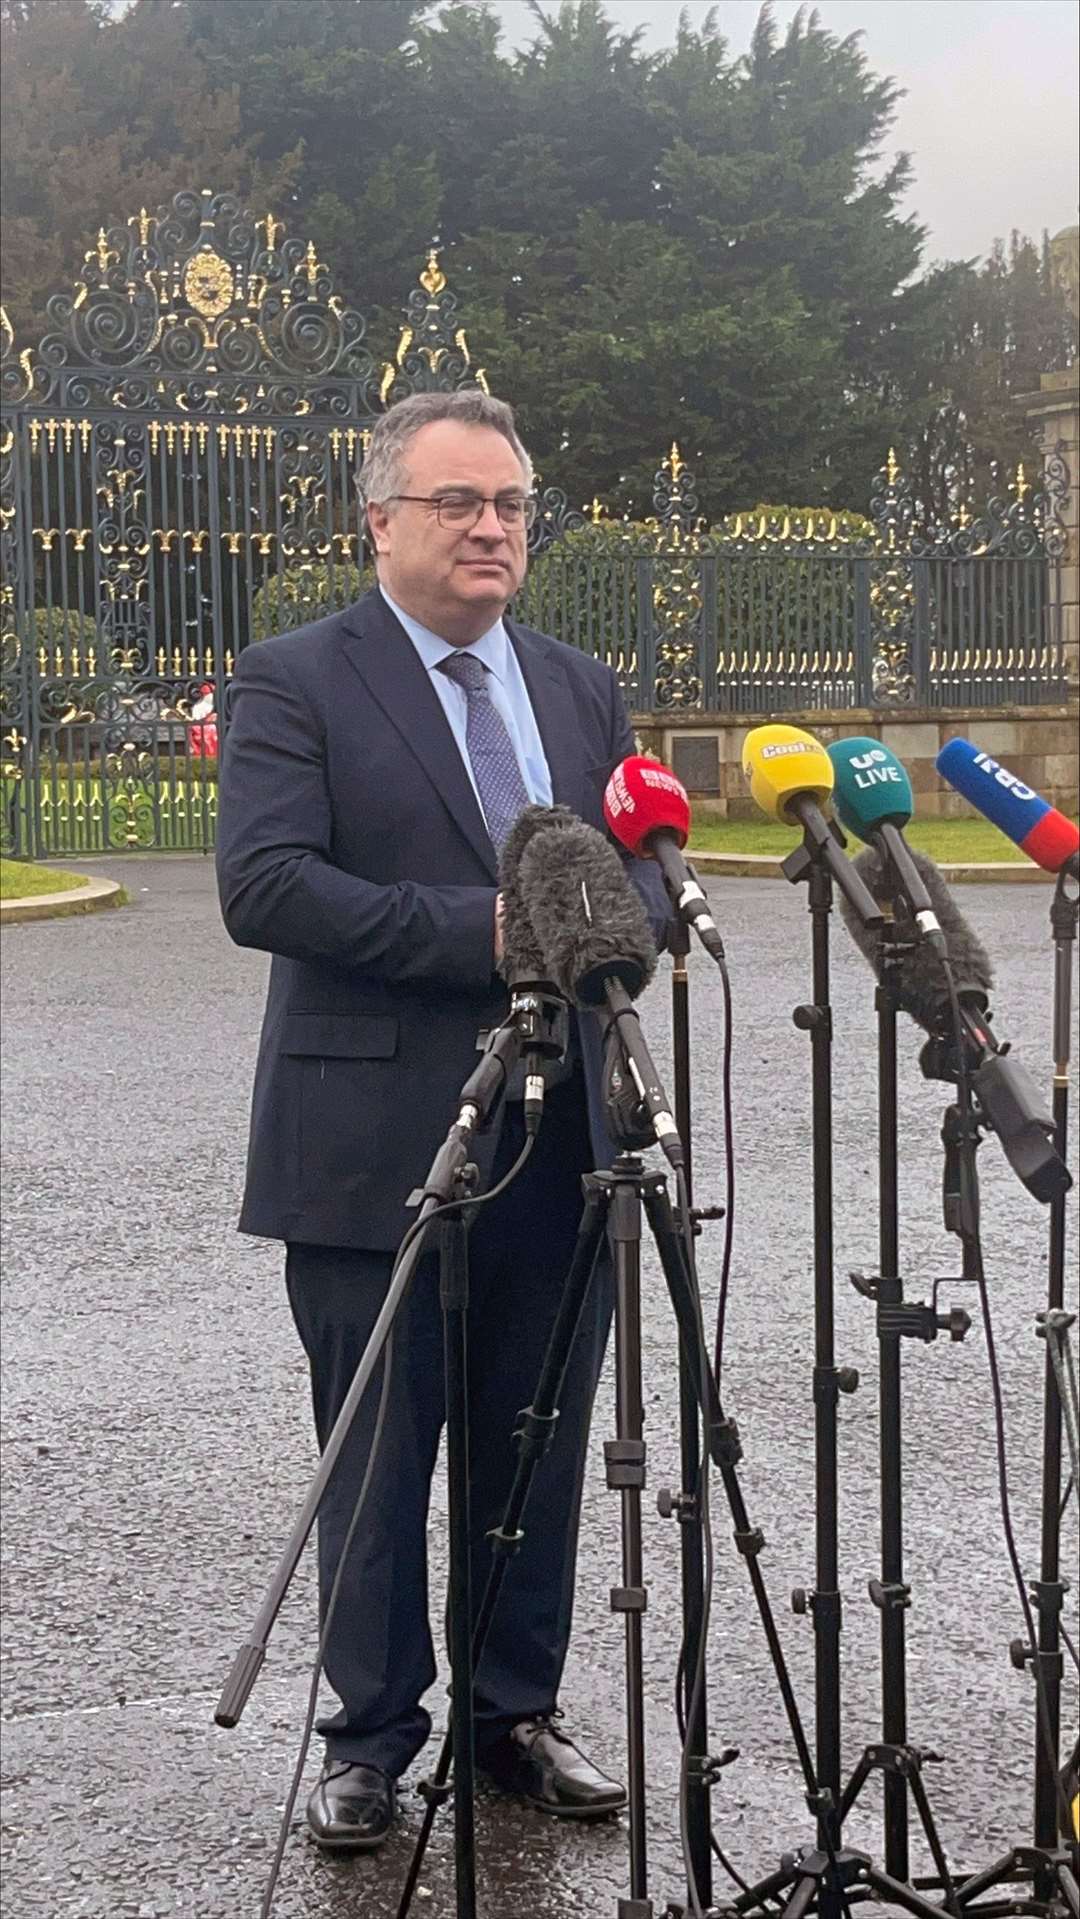 Alliance Party deputy leader Stephen Farry outside Hillsborough castle ahead of talks on a financial package for Northern Ireland (Claudia Savage/PA)